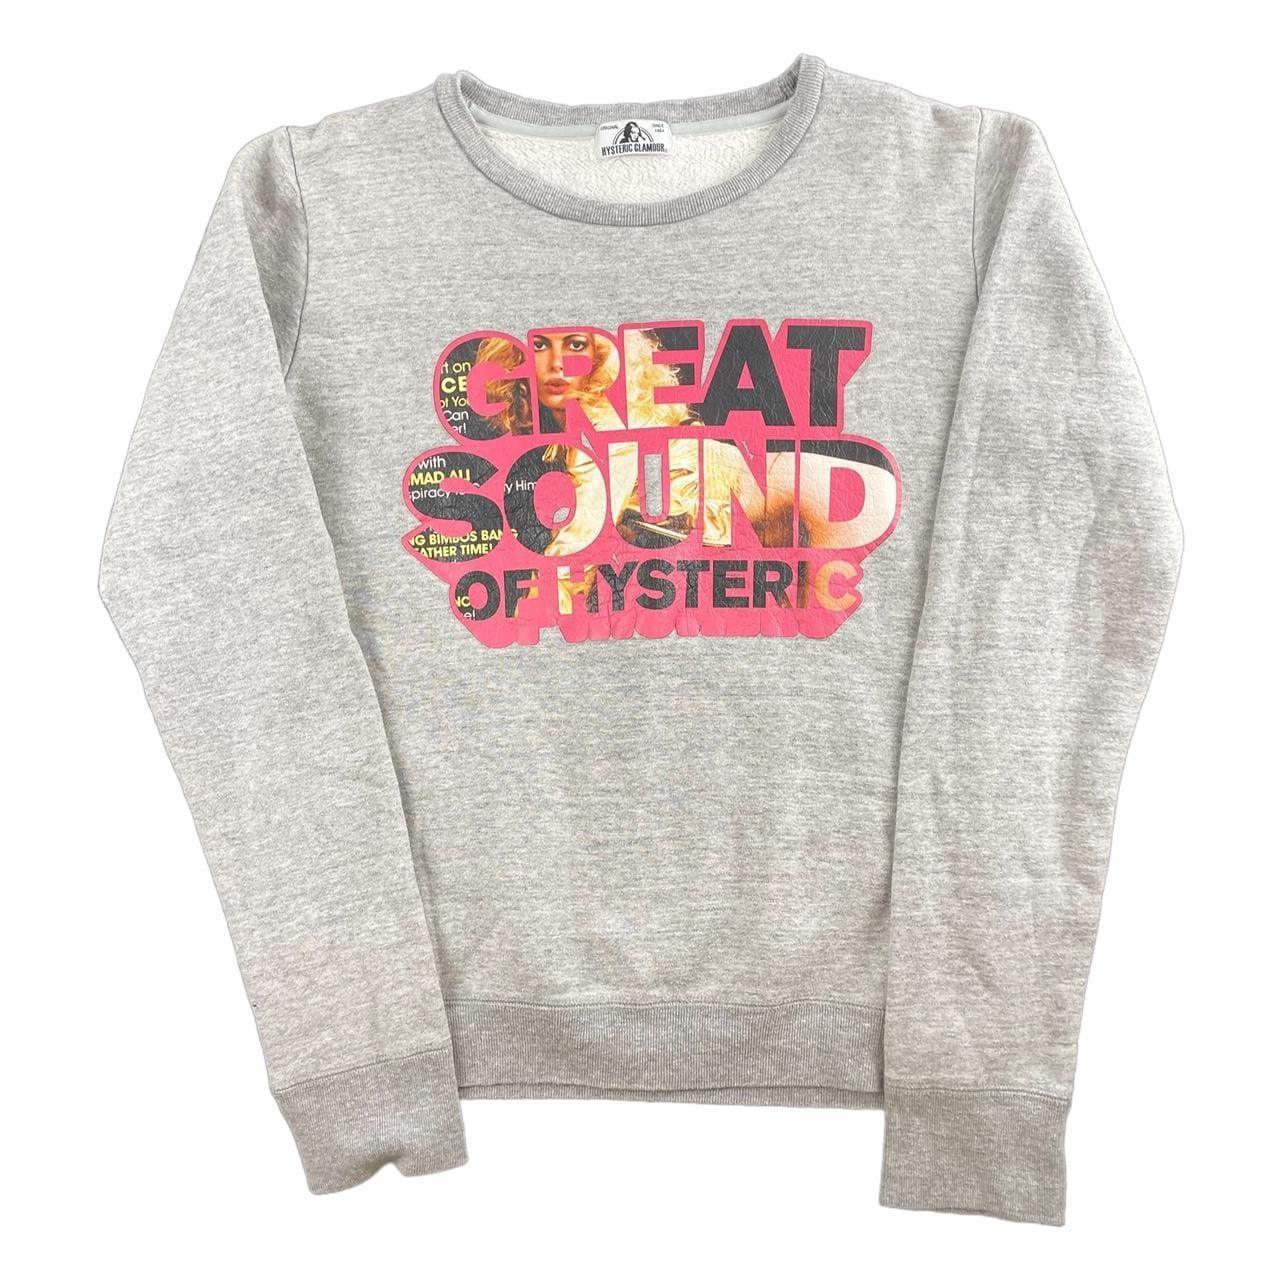 Vintage Hysteric Glamour great sound jumper sweatshirt woman’s size S - Known Source